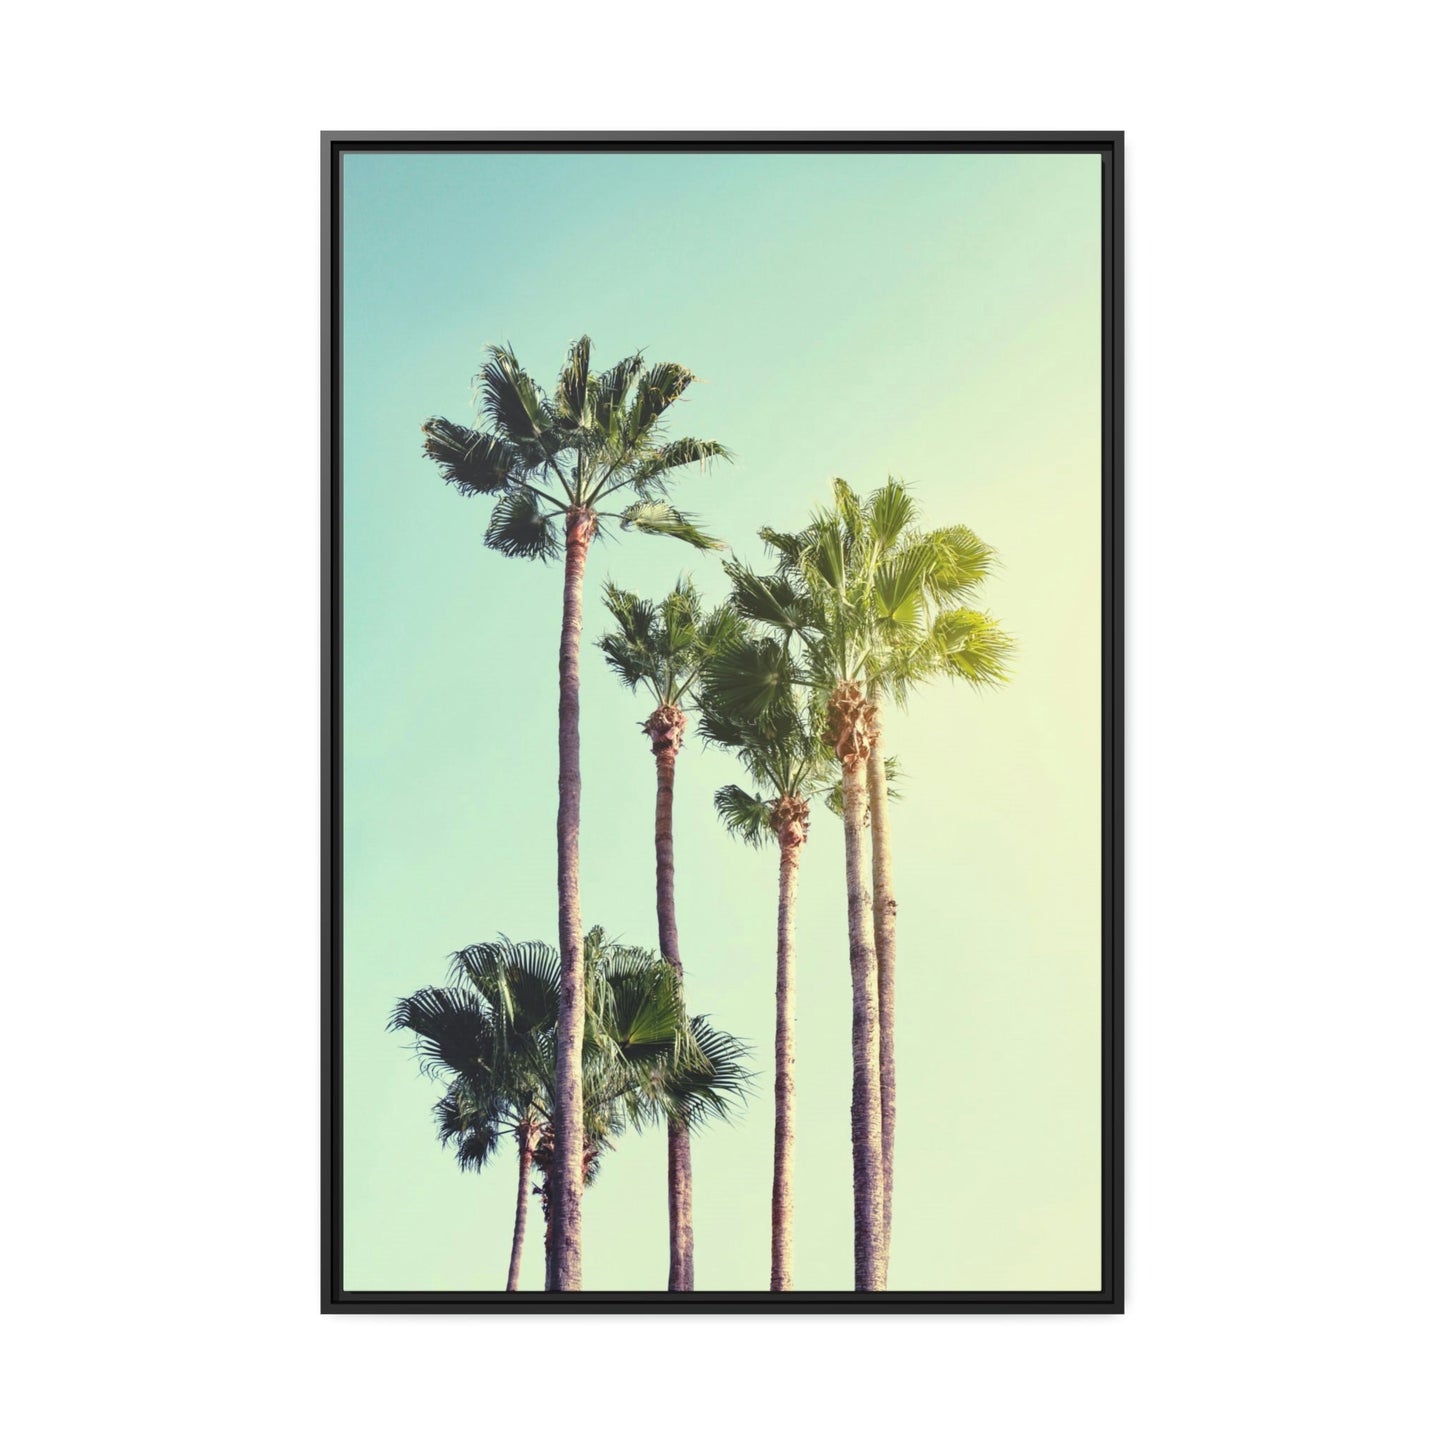 The Palm's Path: A Mesmerizing Wall Art of Palm Trees Lining a Road